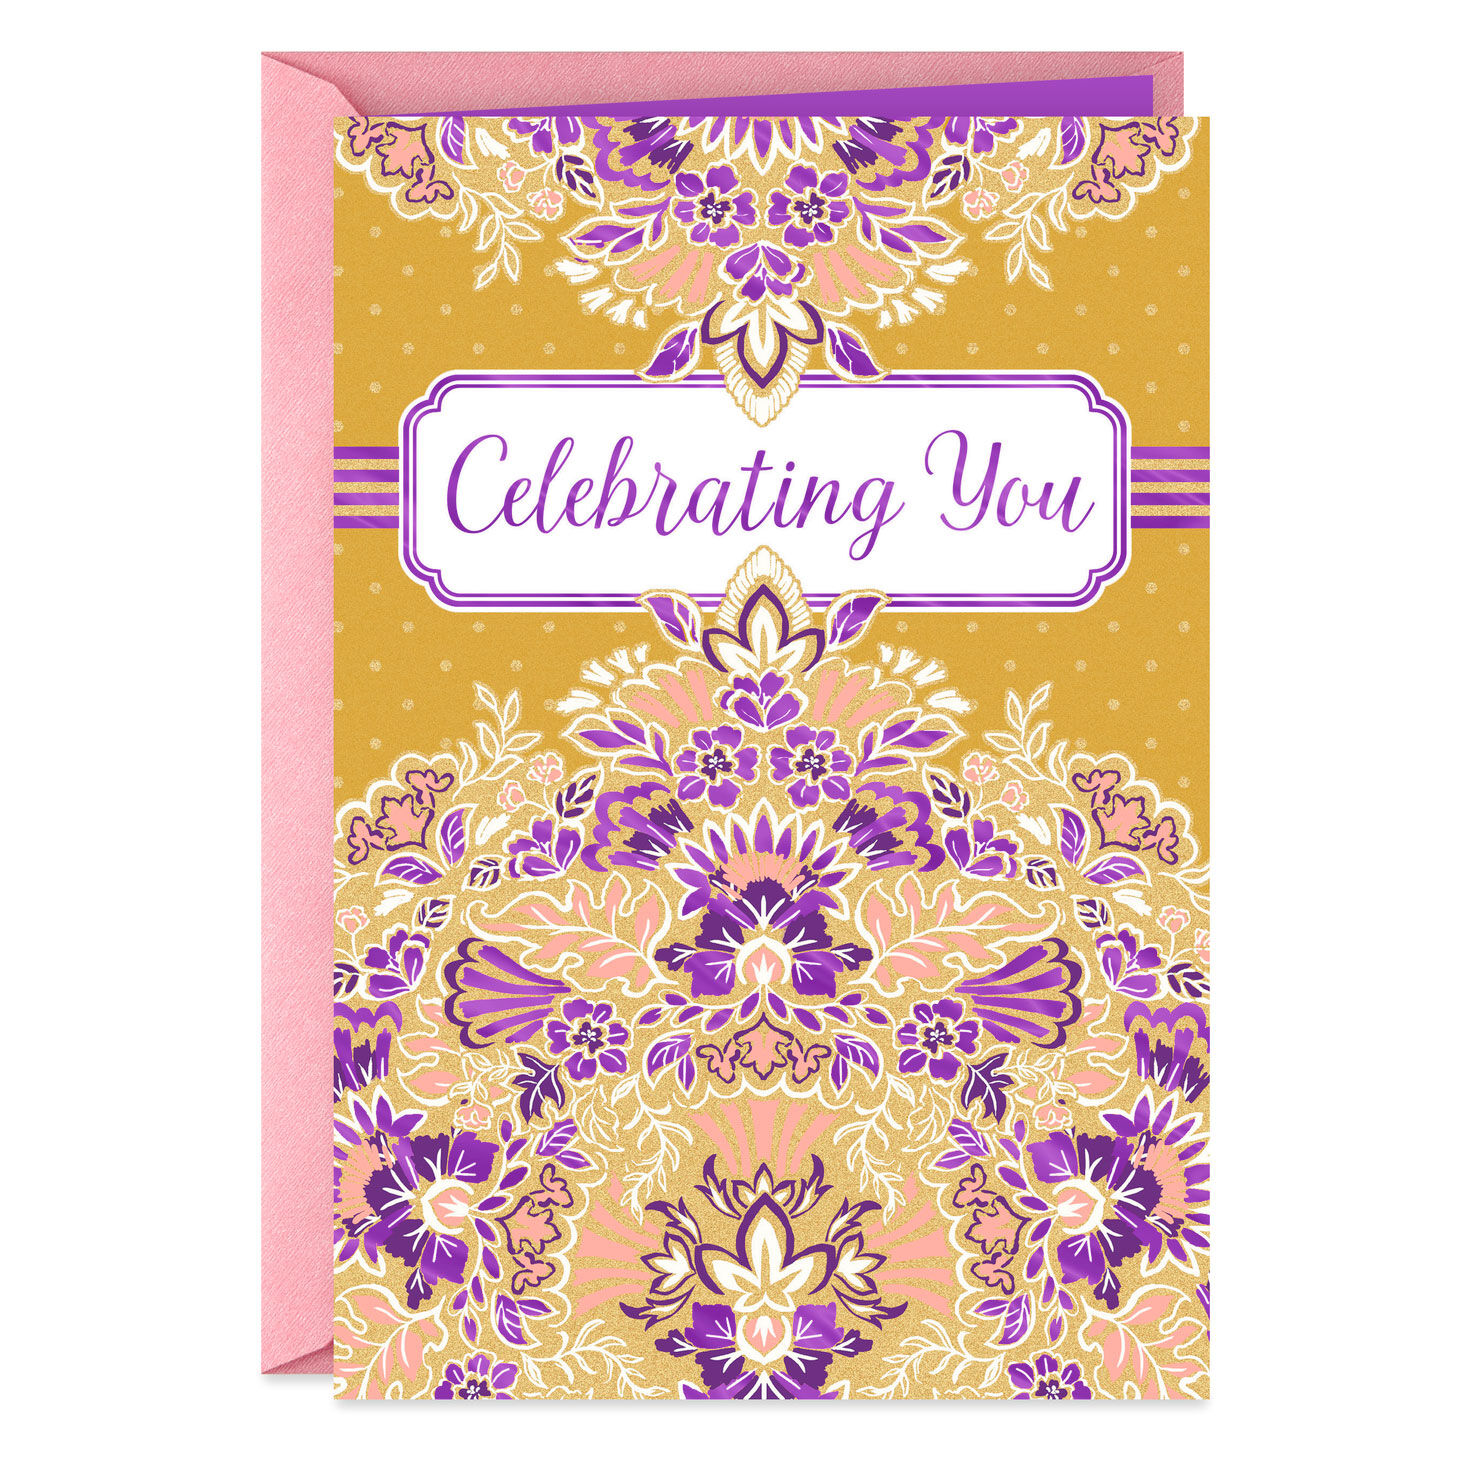 Celebrating You Mother's Day Card for only USD 2.00 | Hallmark